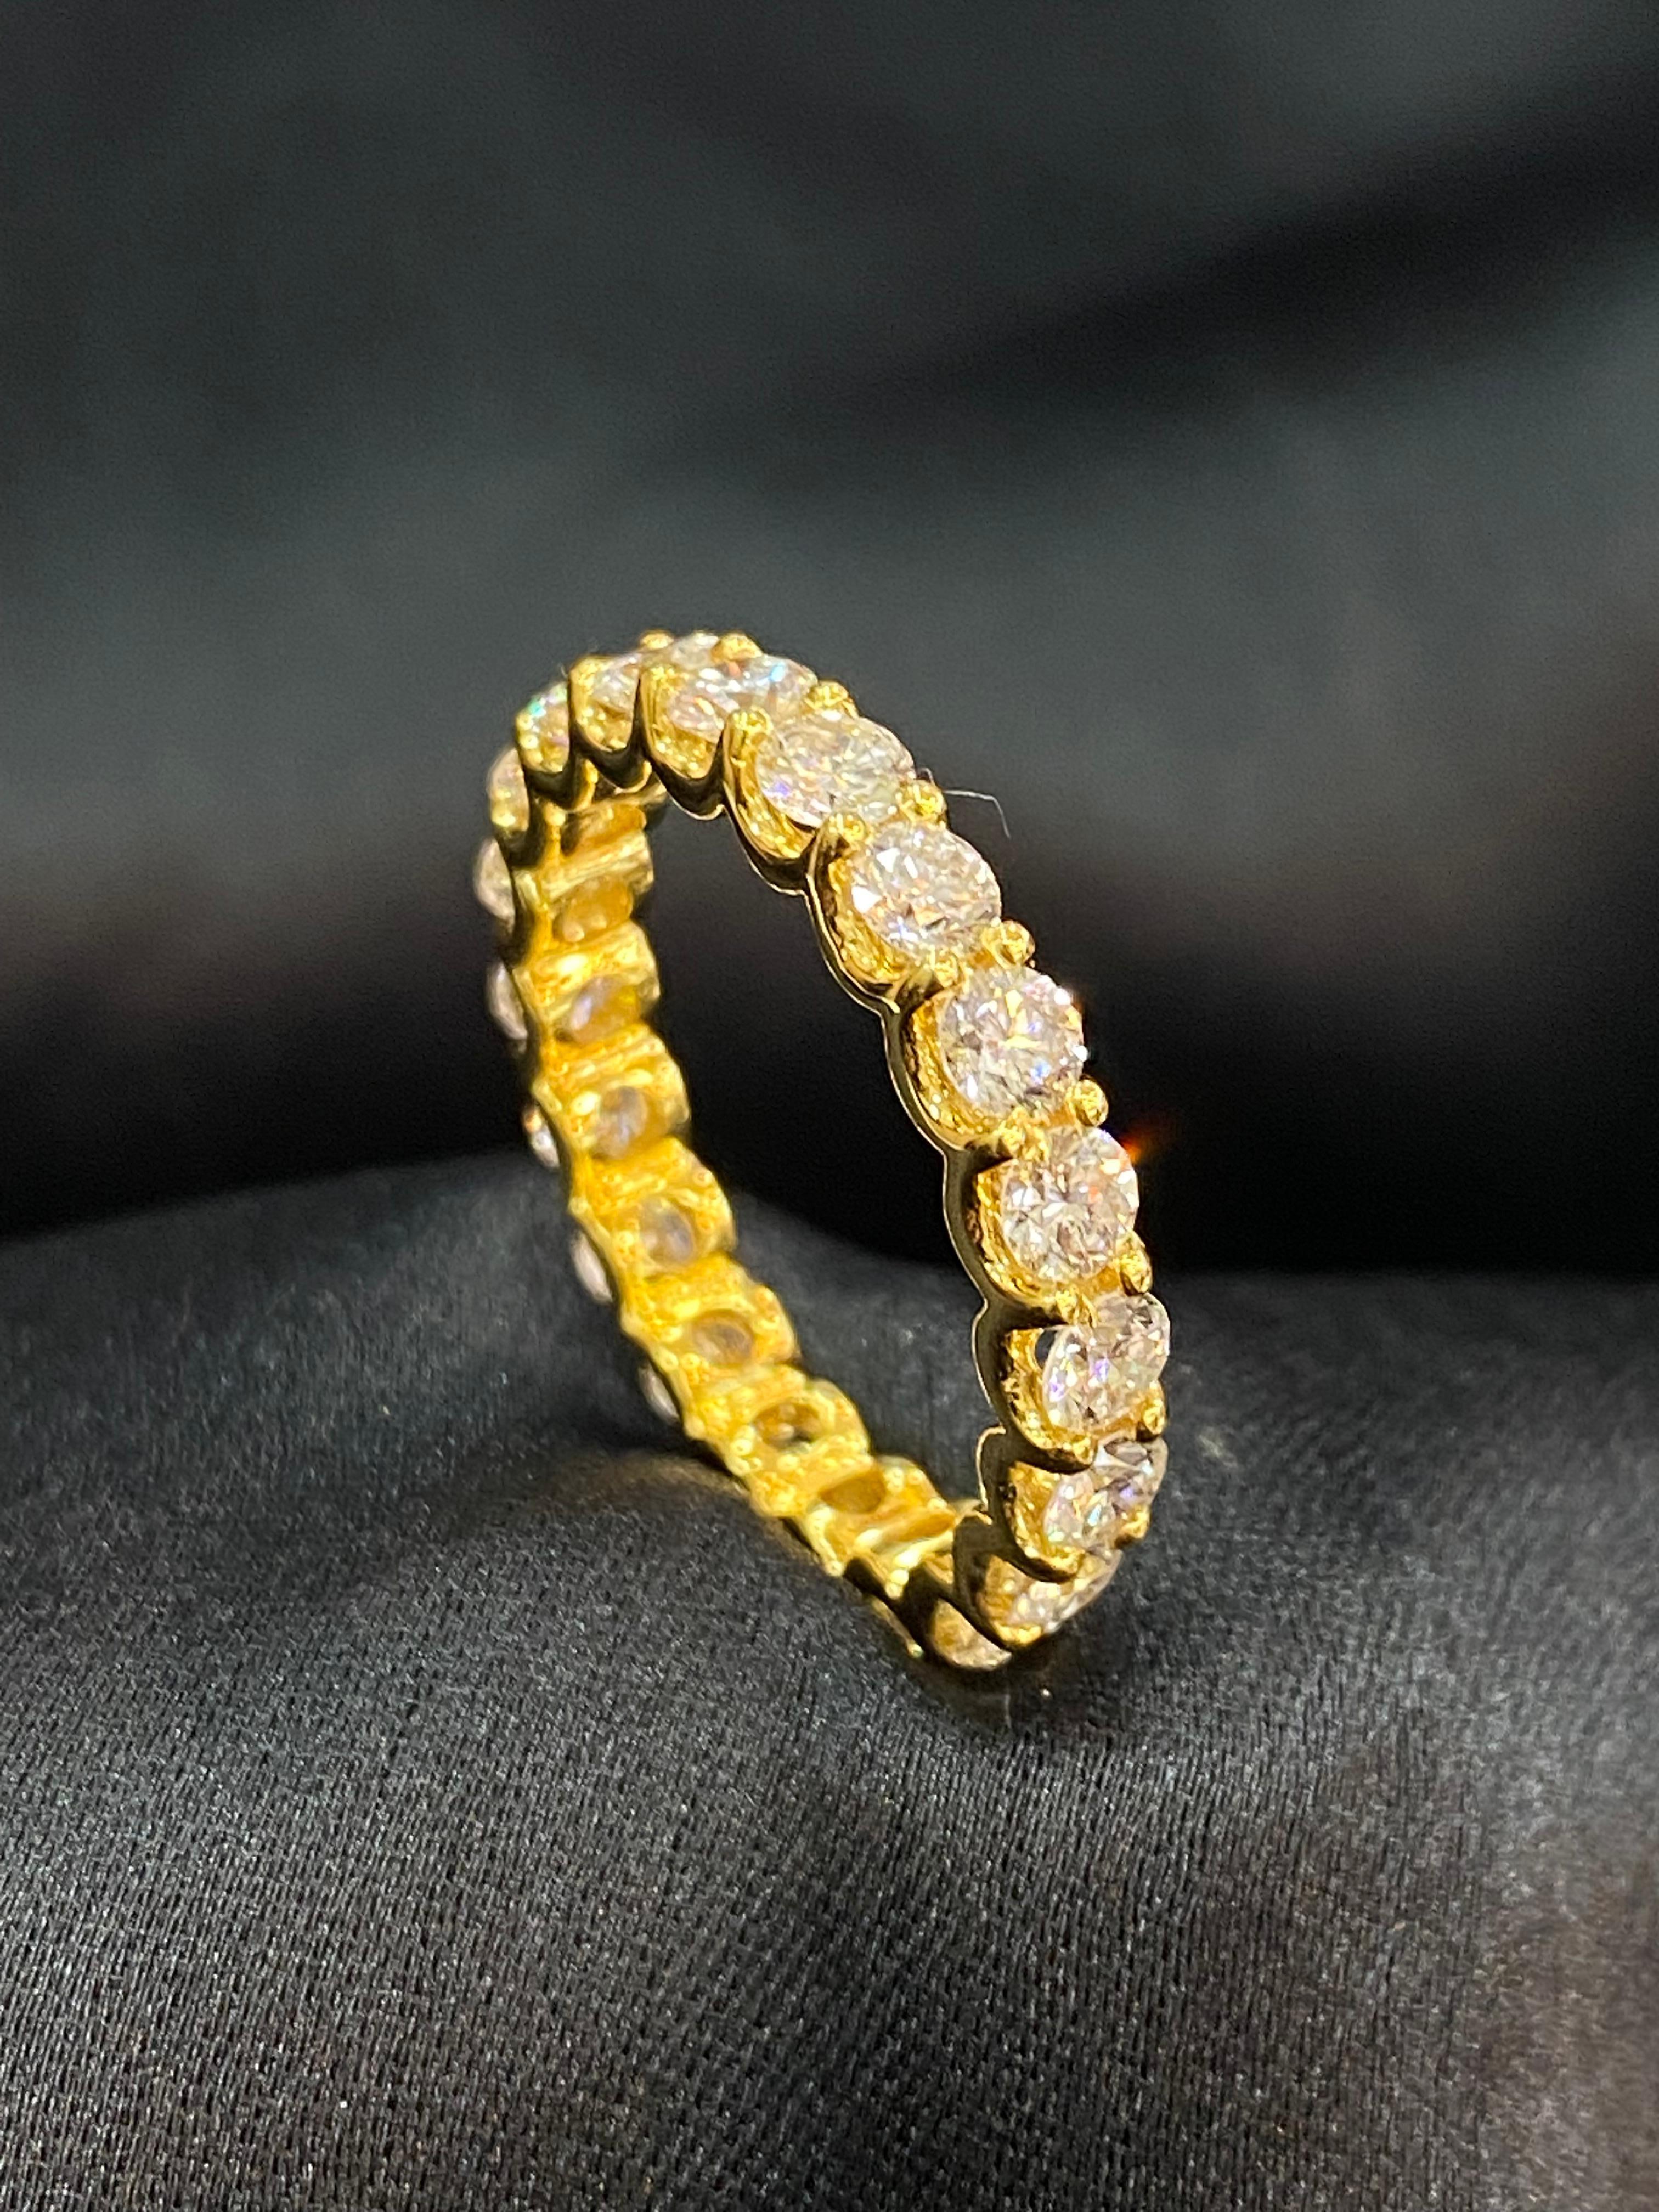 Round Cut Pave 2.40 Cts F/VS1 Round Brilliant Diamonds Eternity Band Ring 18K Yellow Gold For Sale